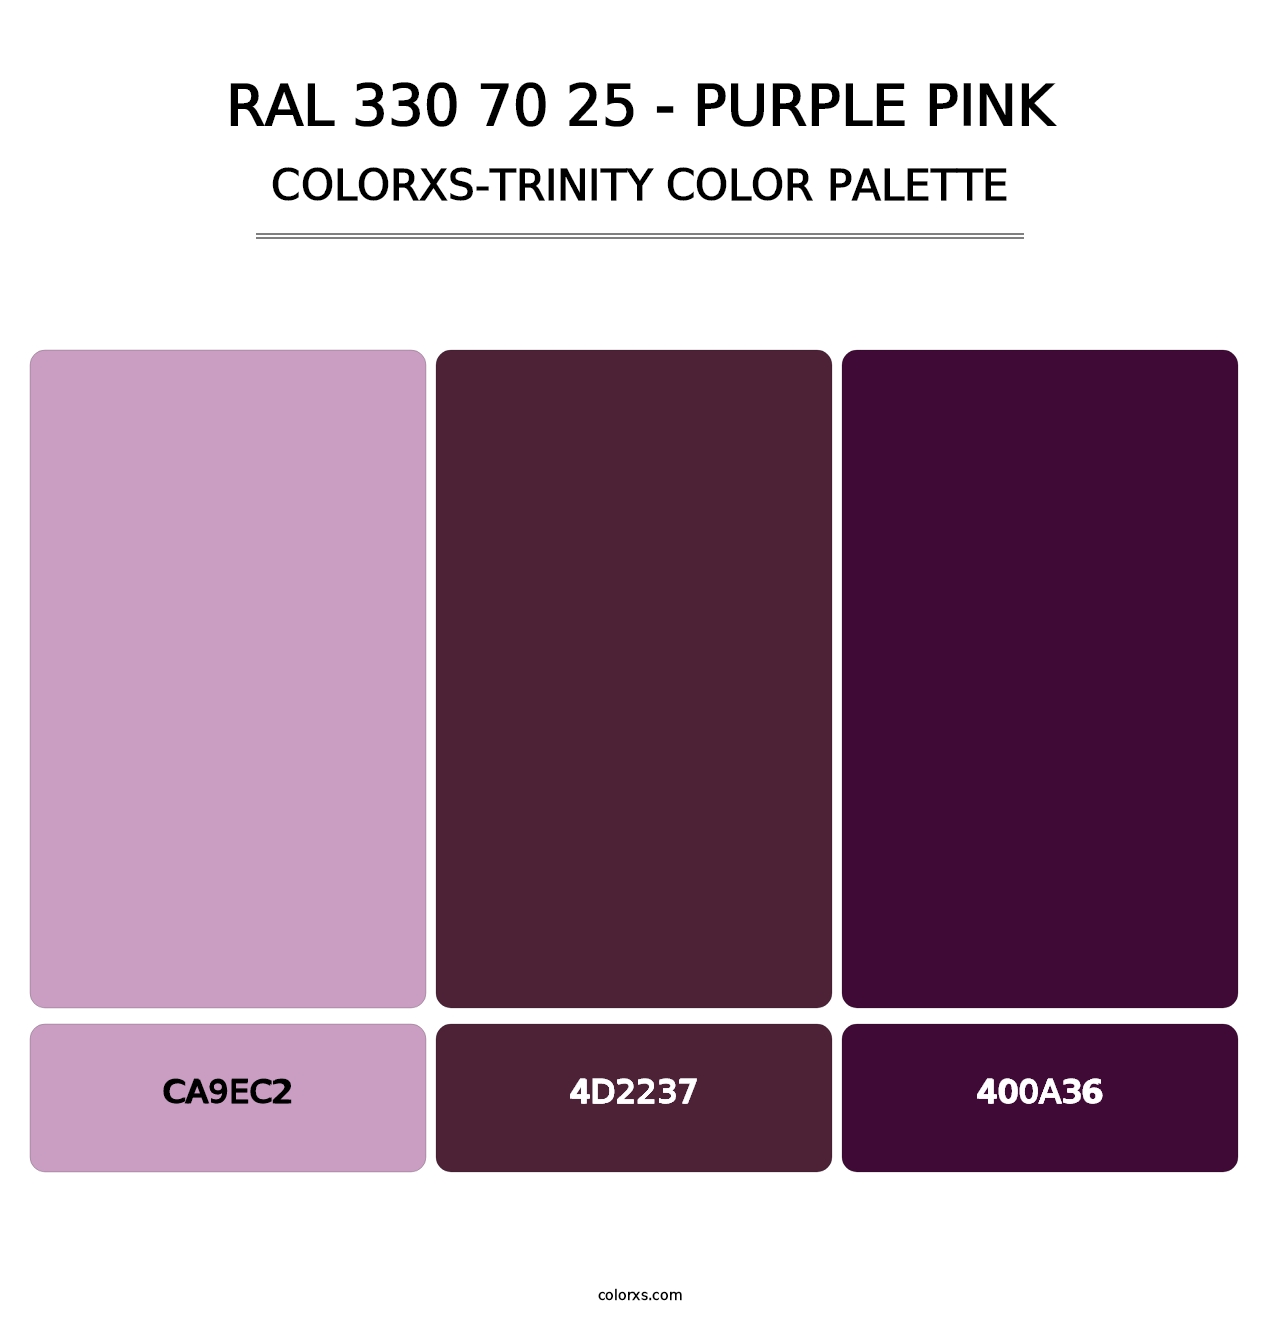 RAL 330 70 25 - Purple Pink - Colorxs Trinity Palette